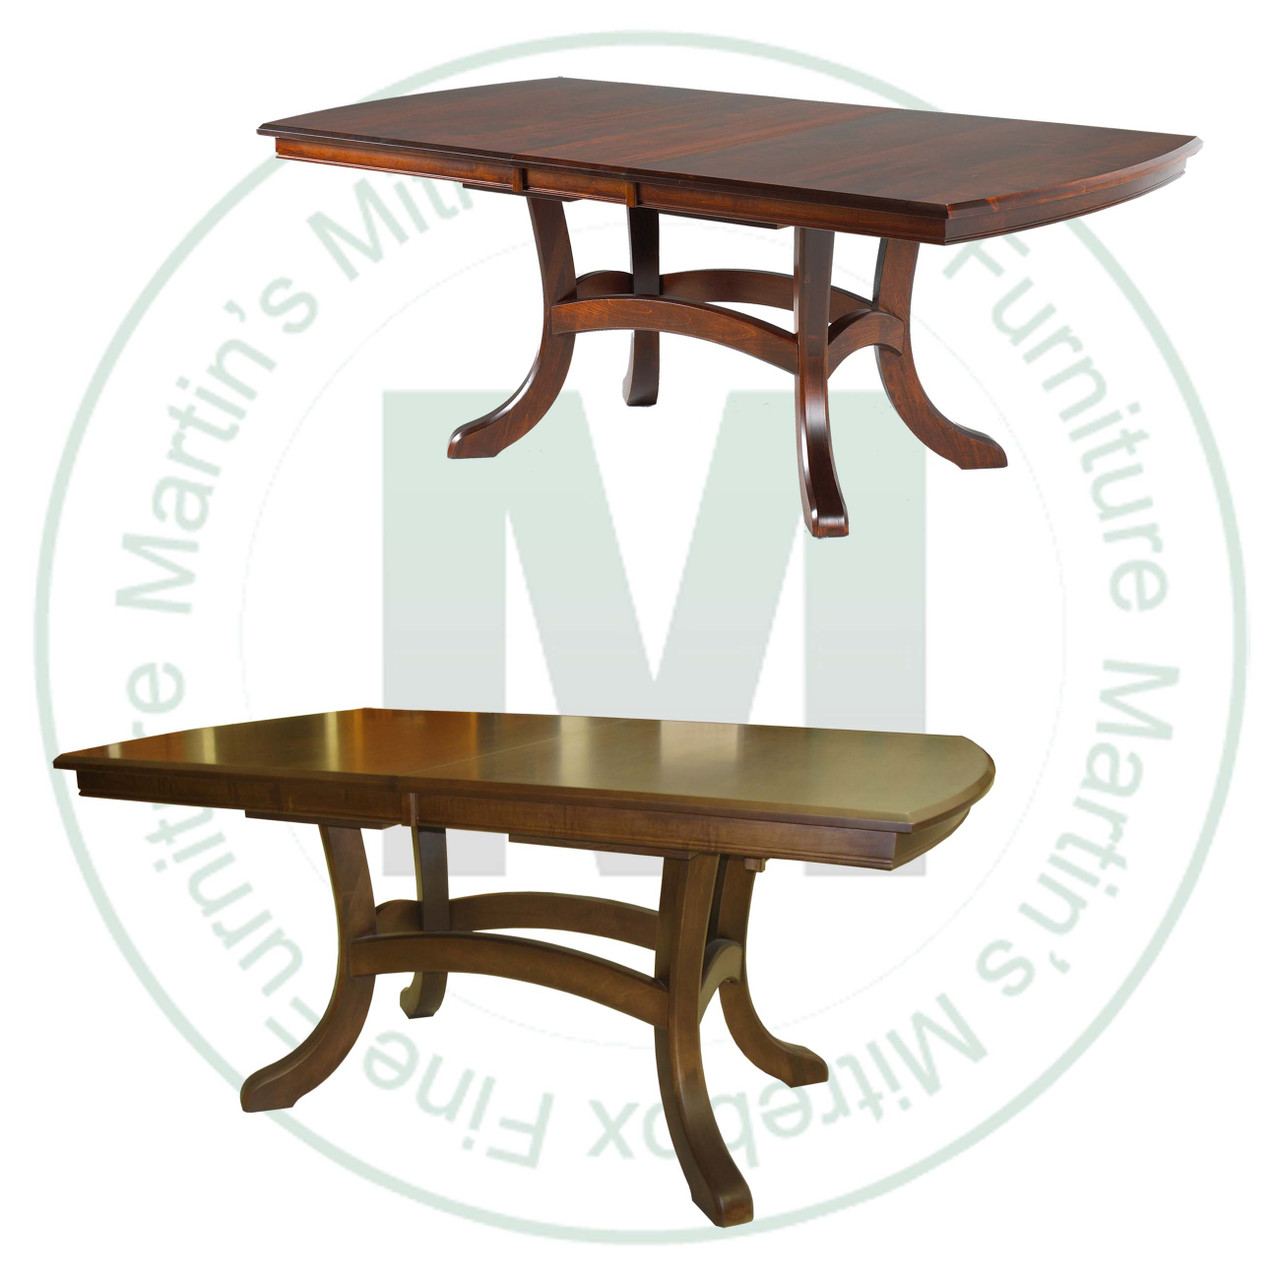 Maple Jordan Double Pedestal Table 48''D x 66''W x 30''H With 2 - 12'' Leaves. Table Has 1'' Thick Top